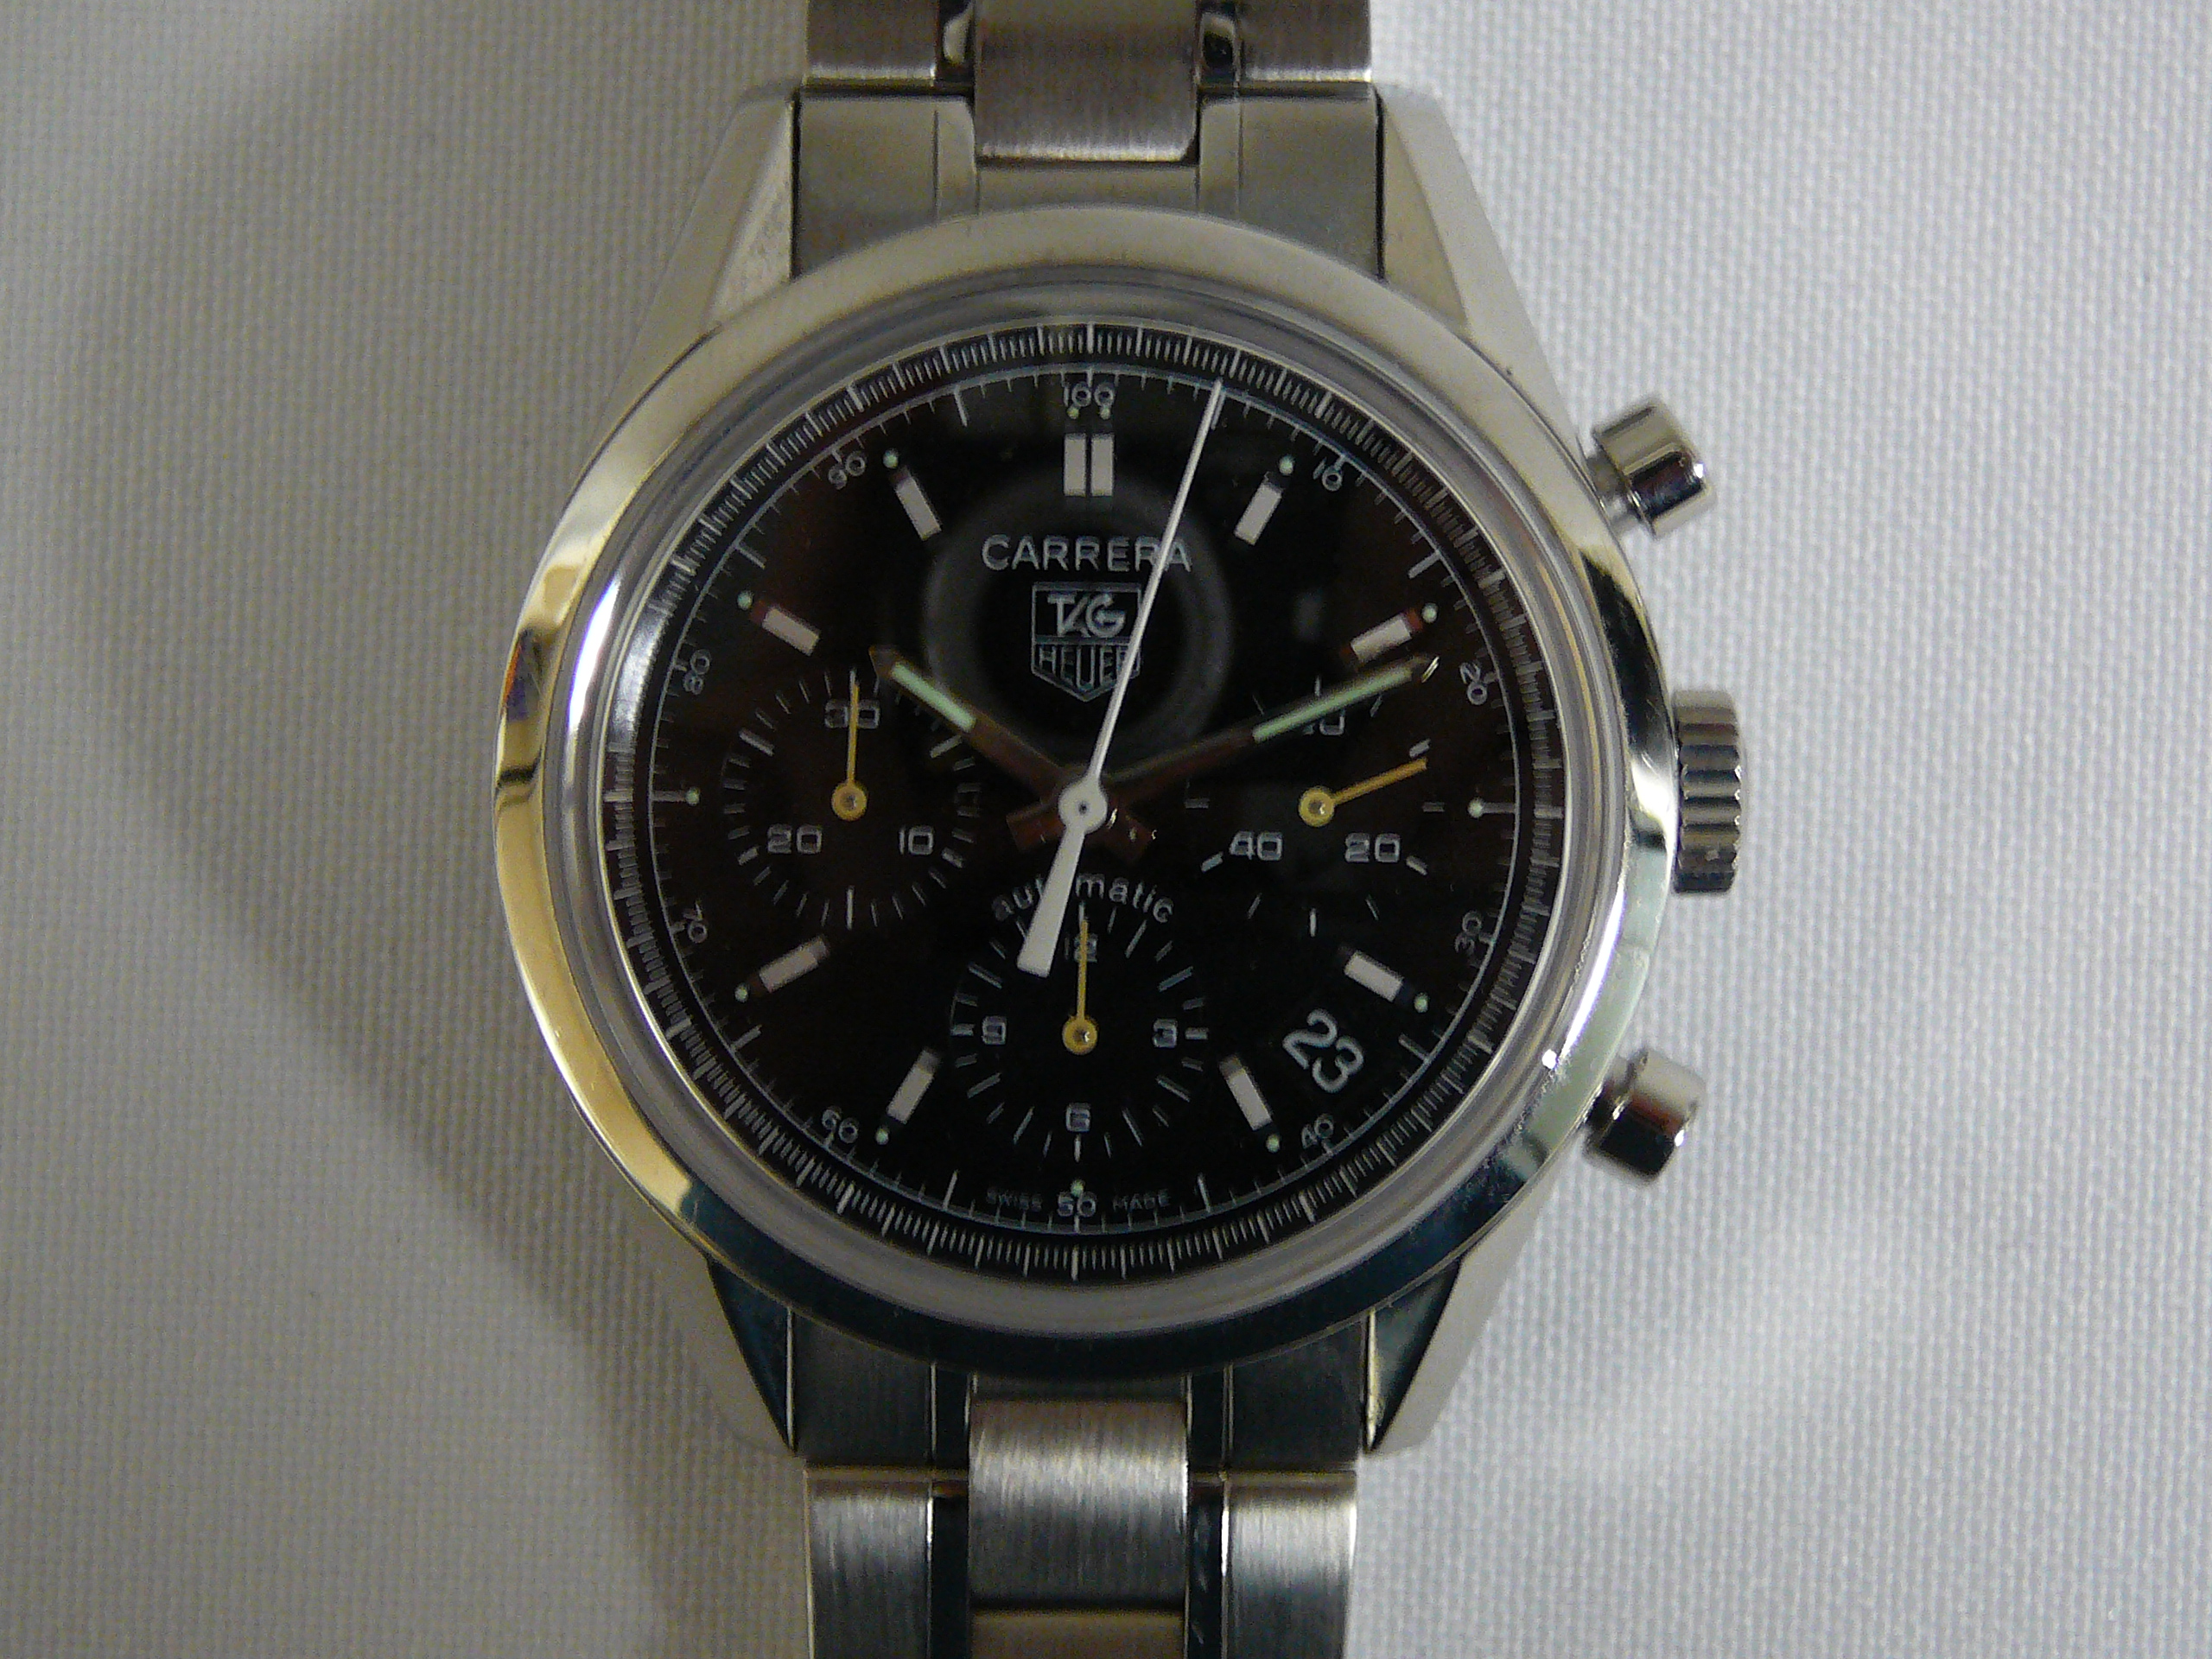 Gents Tag Heuer Wrist Watch - Image 3 of 5